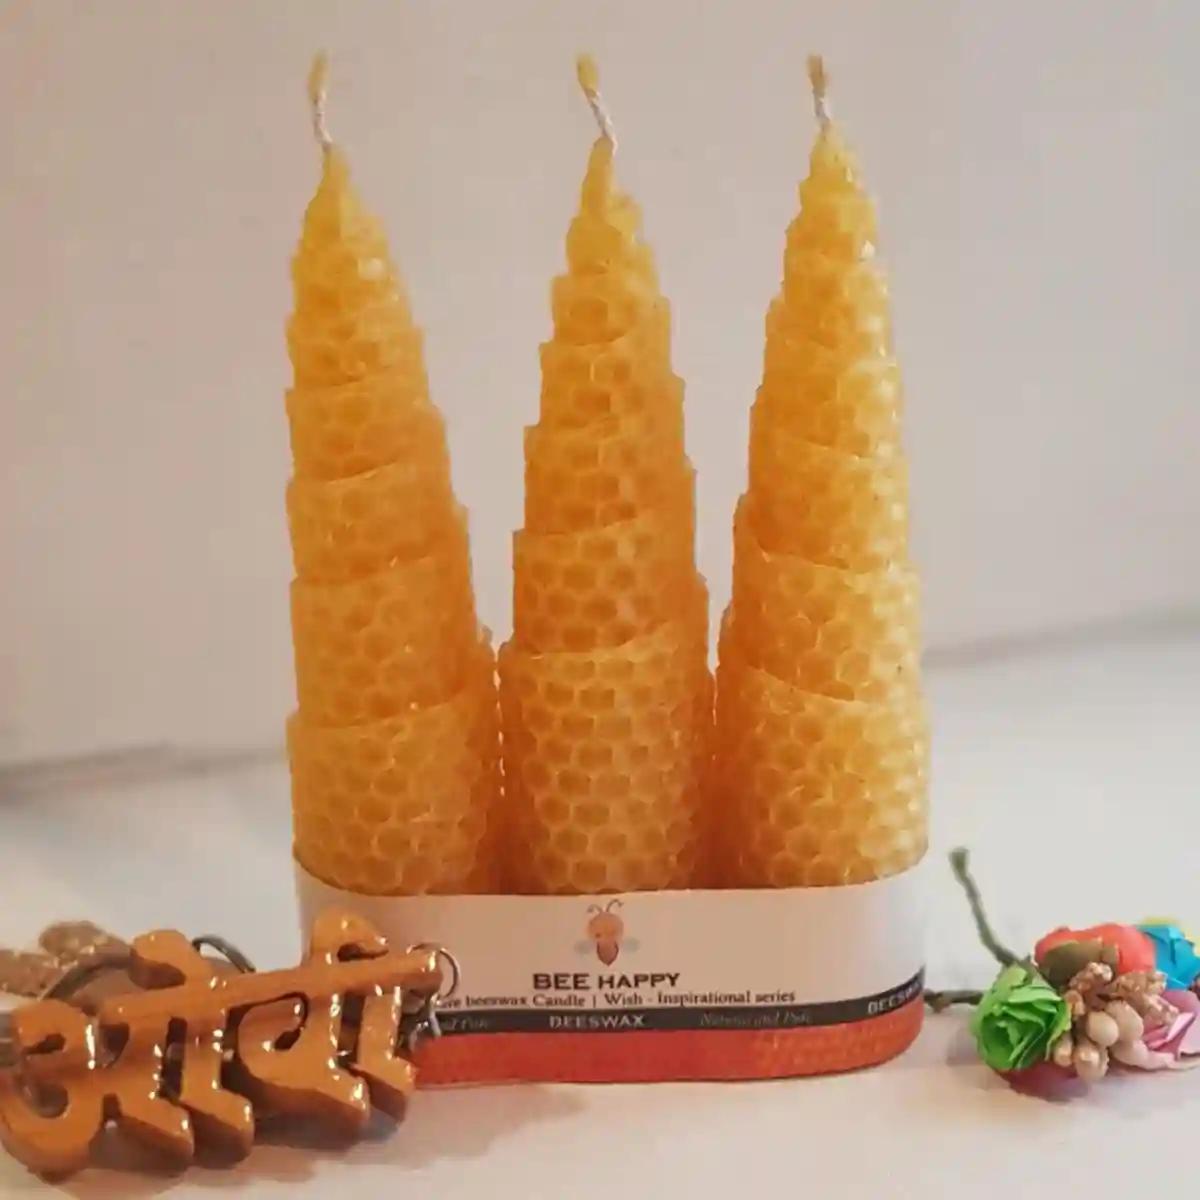 Bee Happy Pure Beeswax Hand Rolled Tree Candle (Pack of 3)